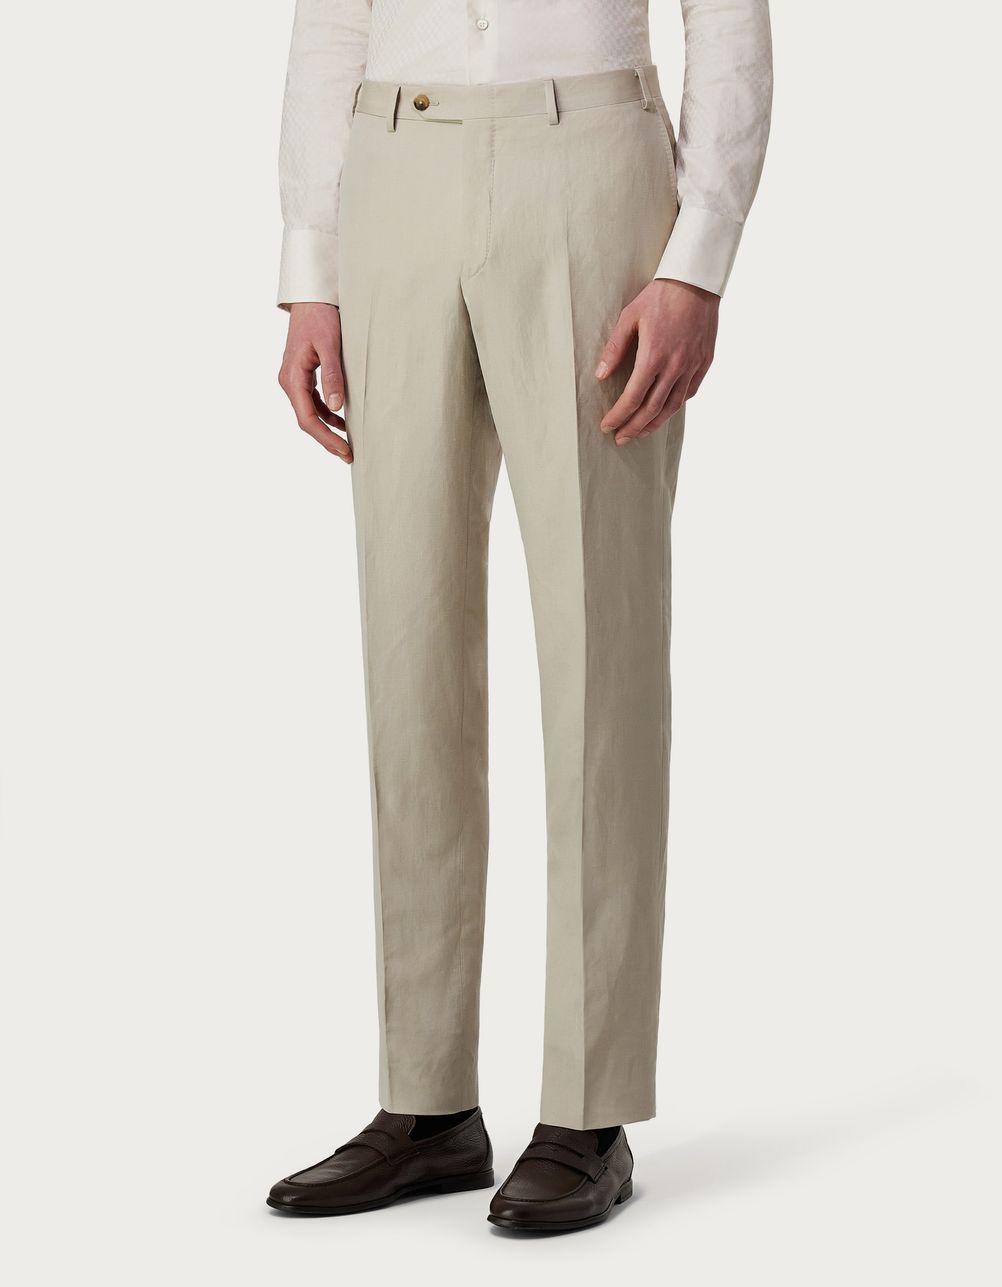 Natural pants in silk and linen - Exclusive